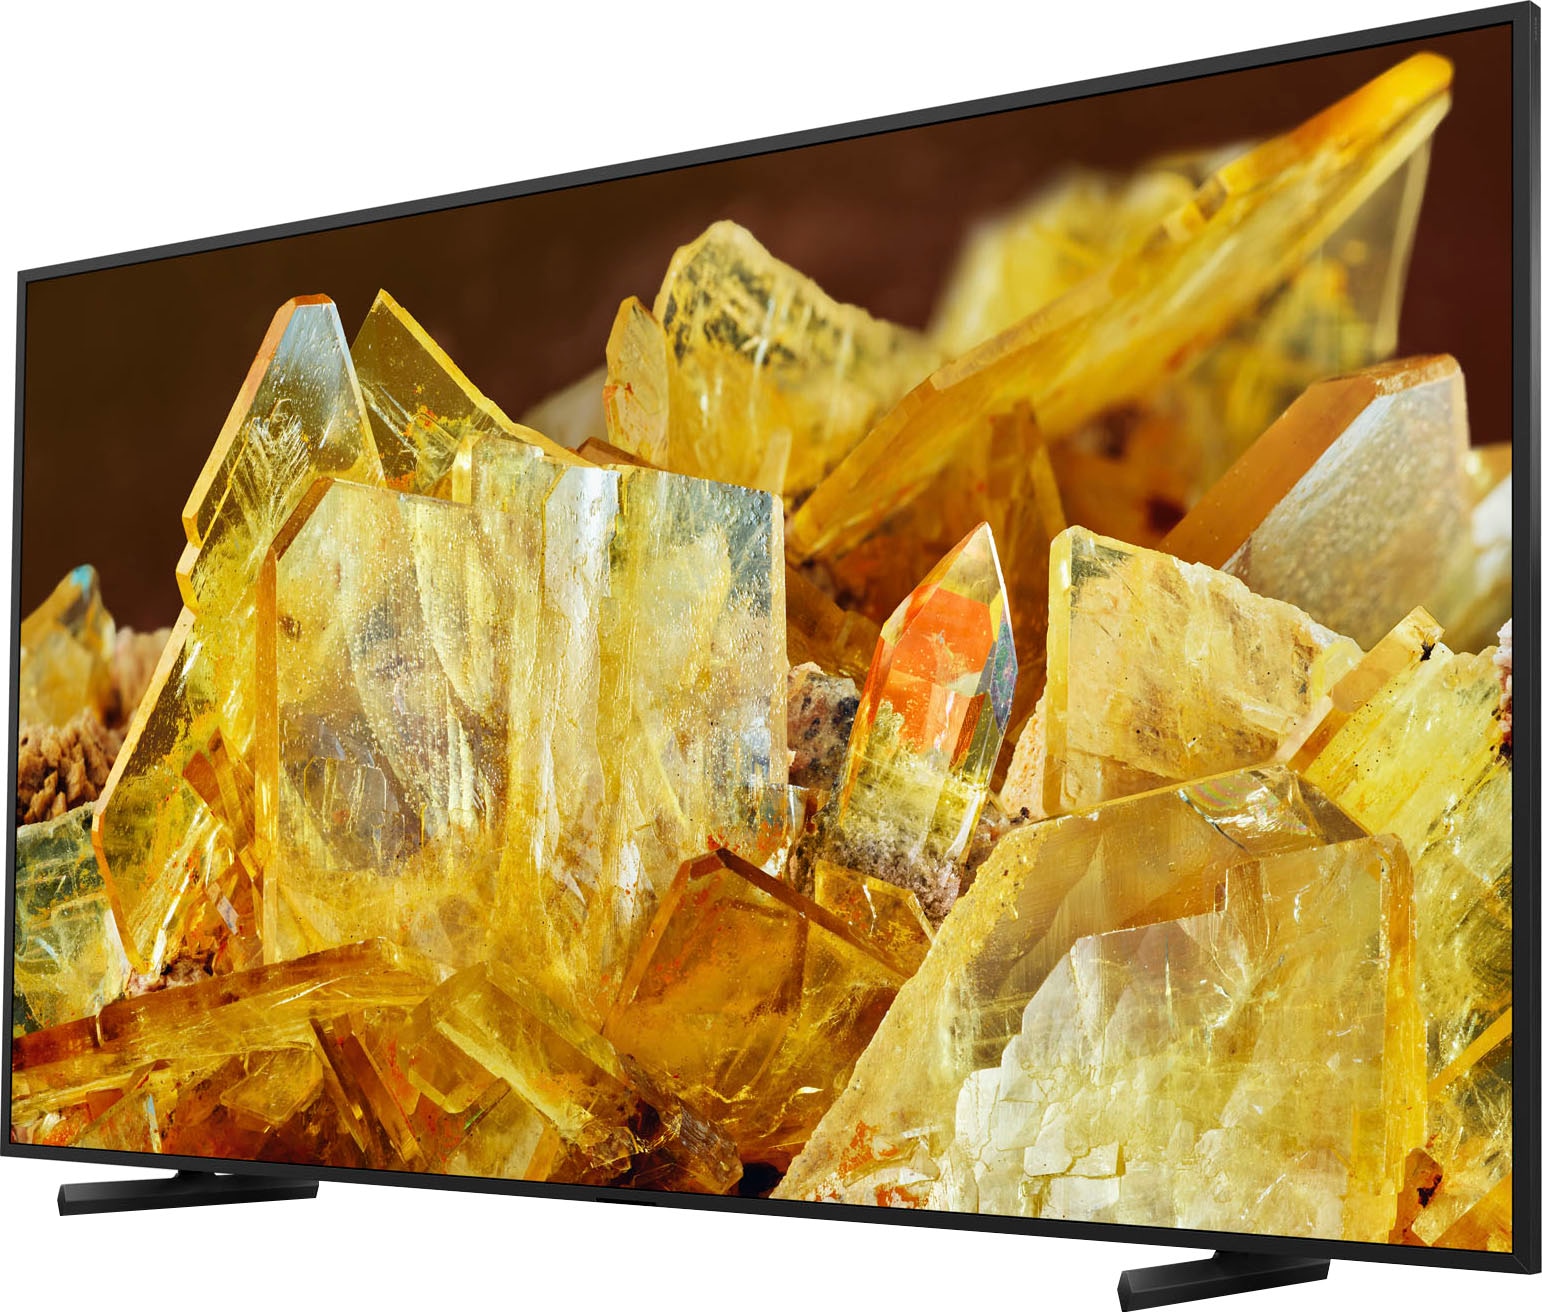 Sony LED-Fernseher, 248 cm/98 Zoll, 4K Ultra HD, Google TV, TRILUMINOS PRO, BRAVIA CORE, mit exklusiven PS5-Features